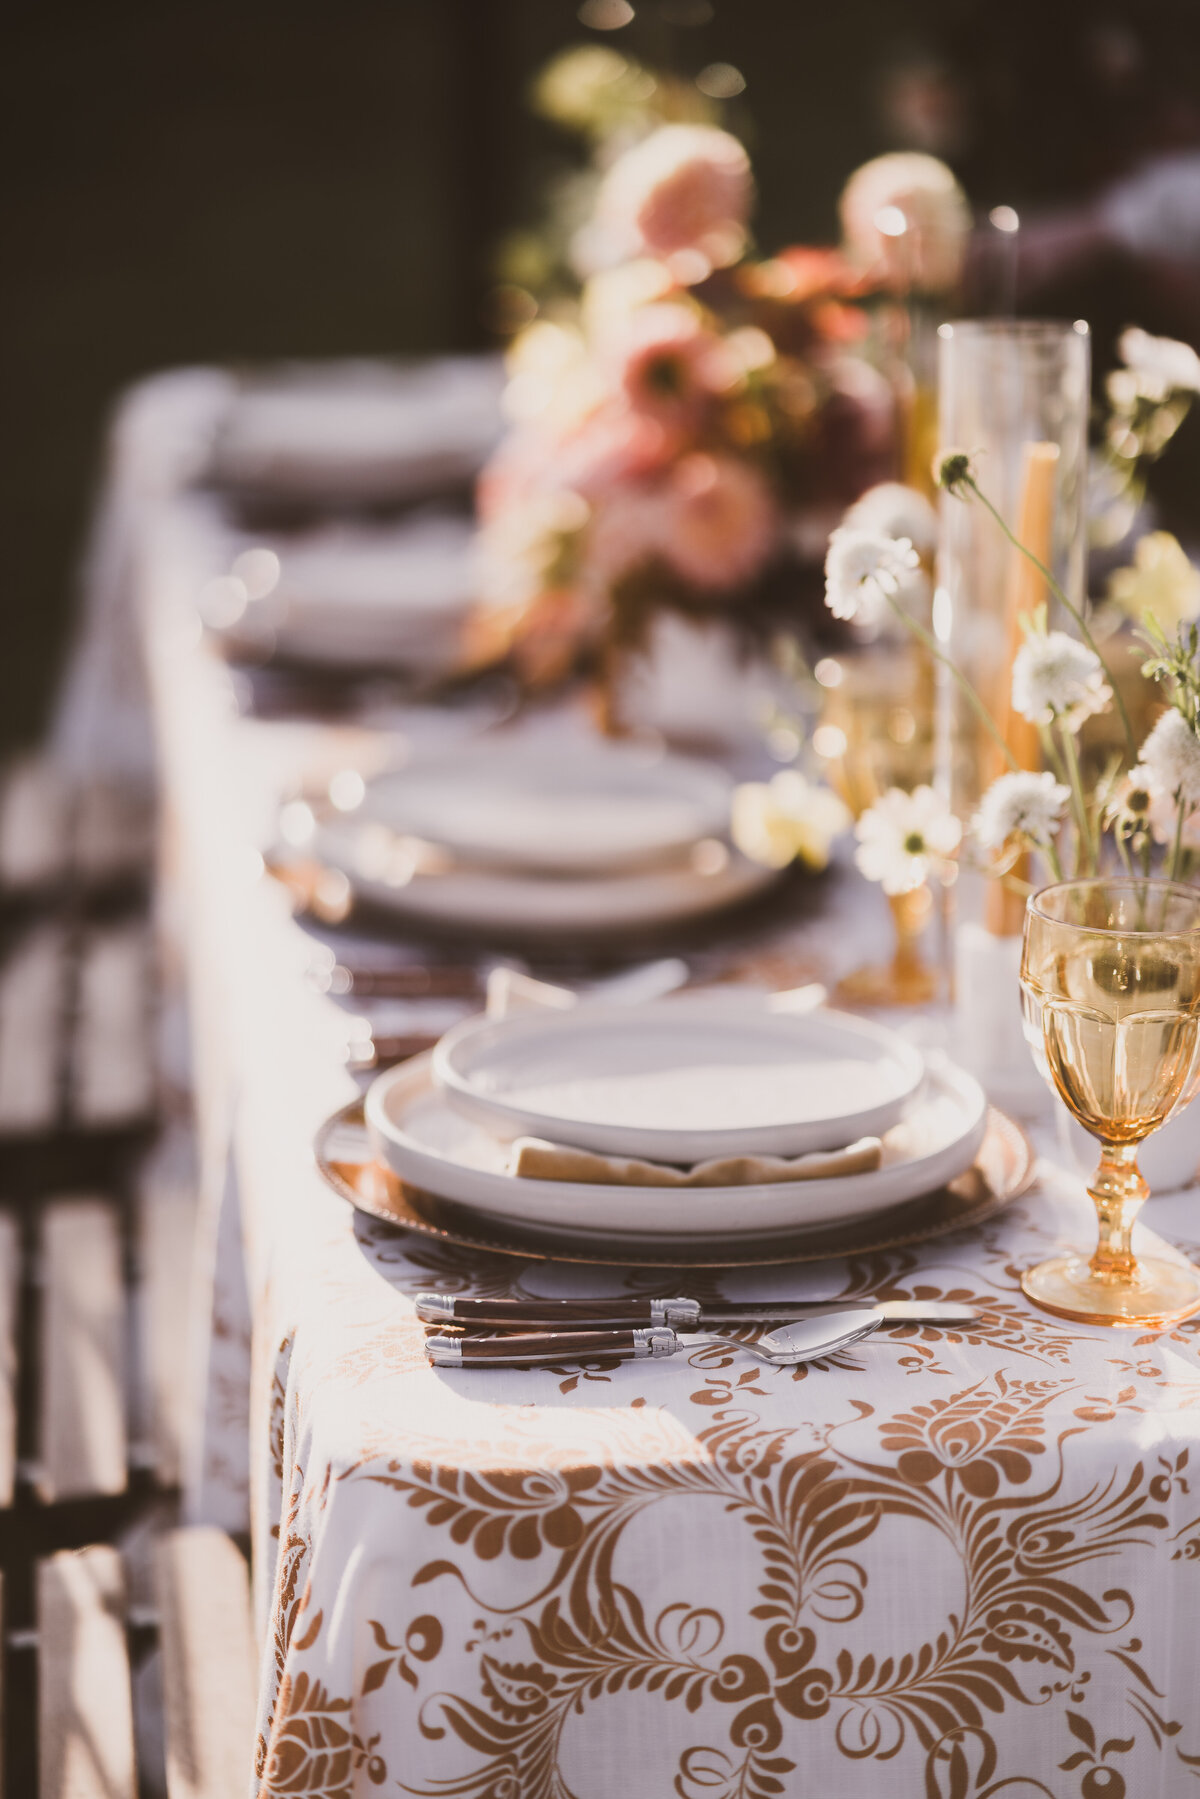 Golden Yellow Patterned Table Linen with Romantic Floral